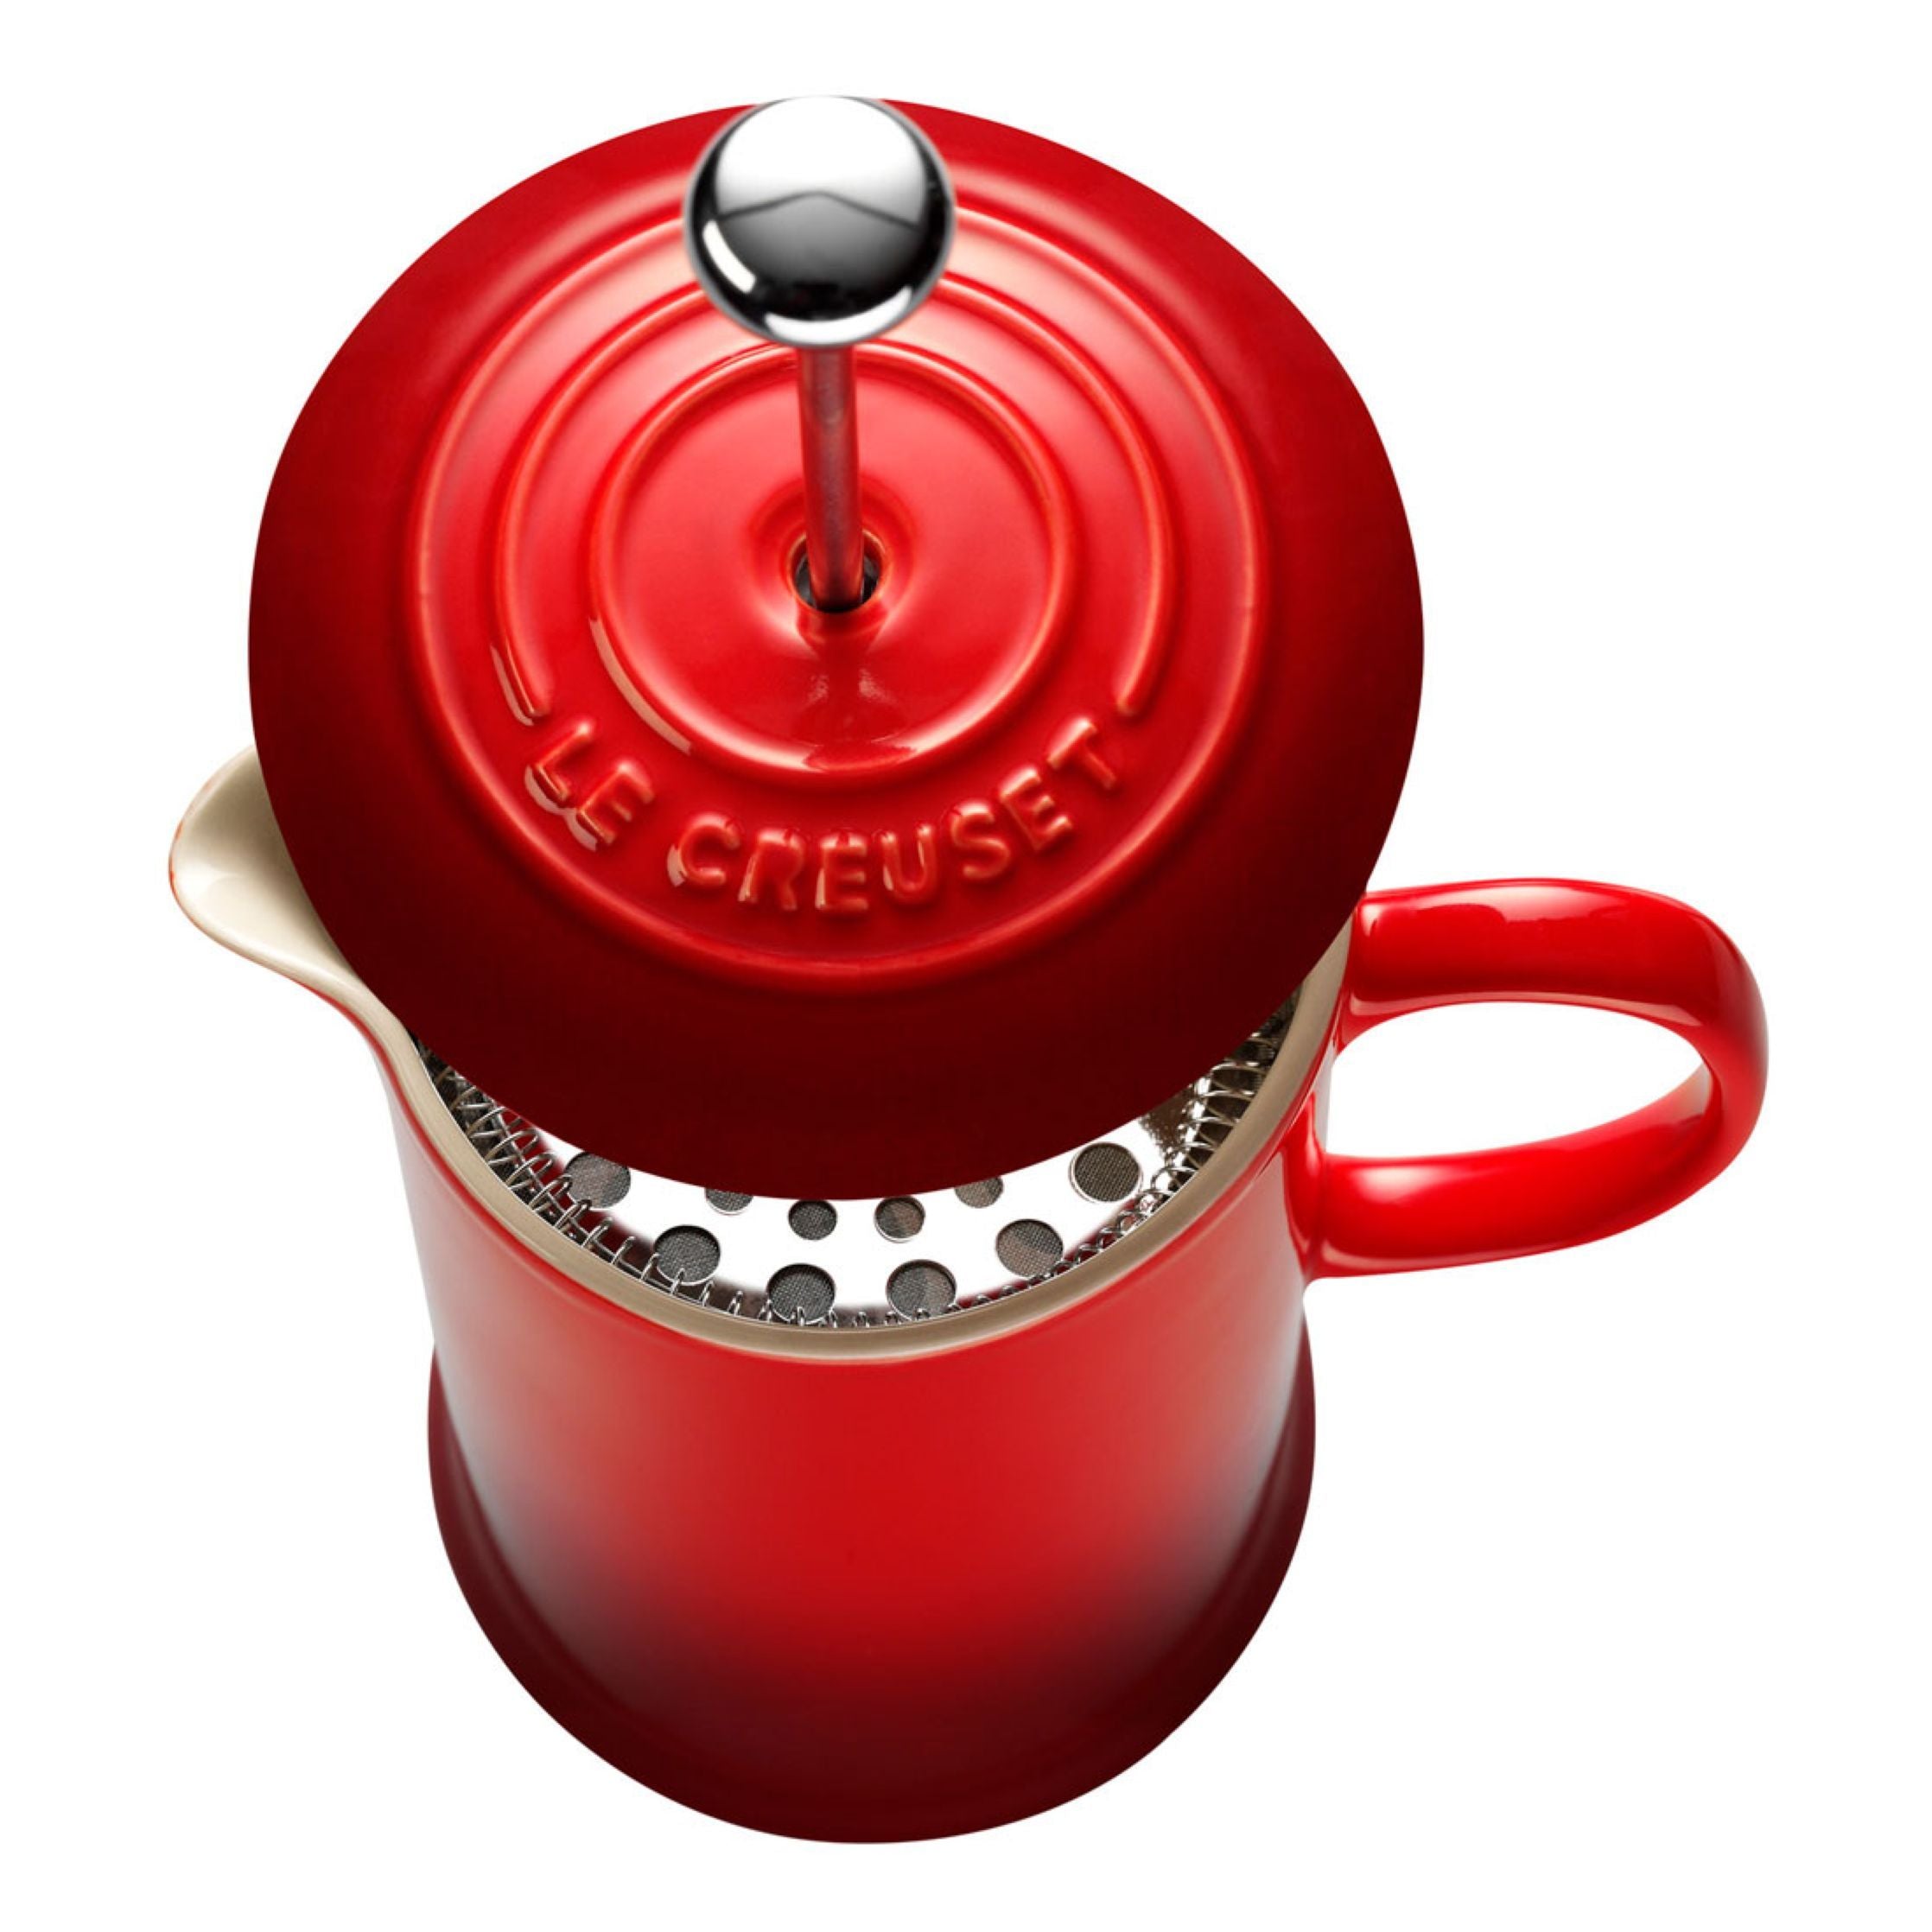 Le Creuset Koffiezetapparaat 1 L, Cherry Red